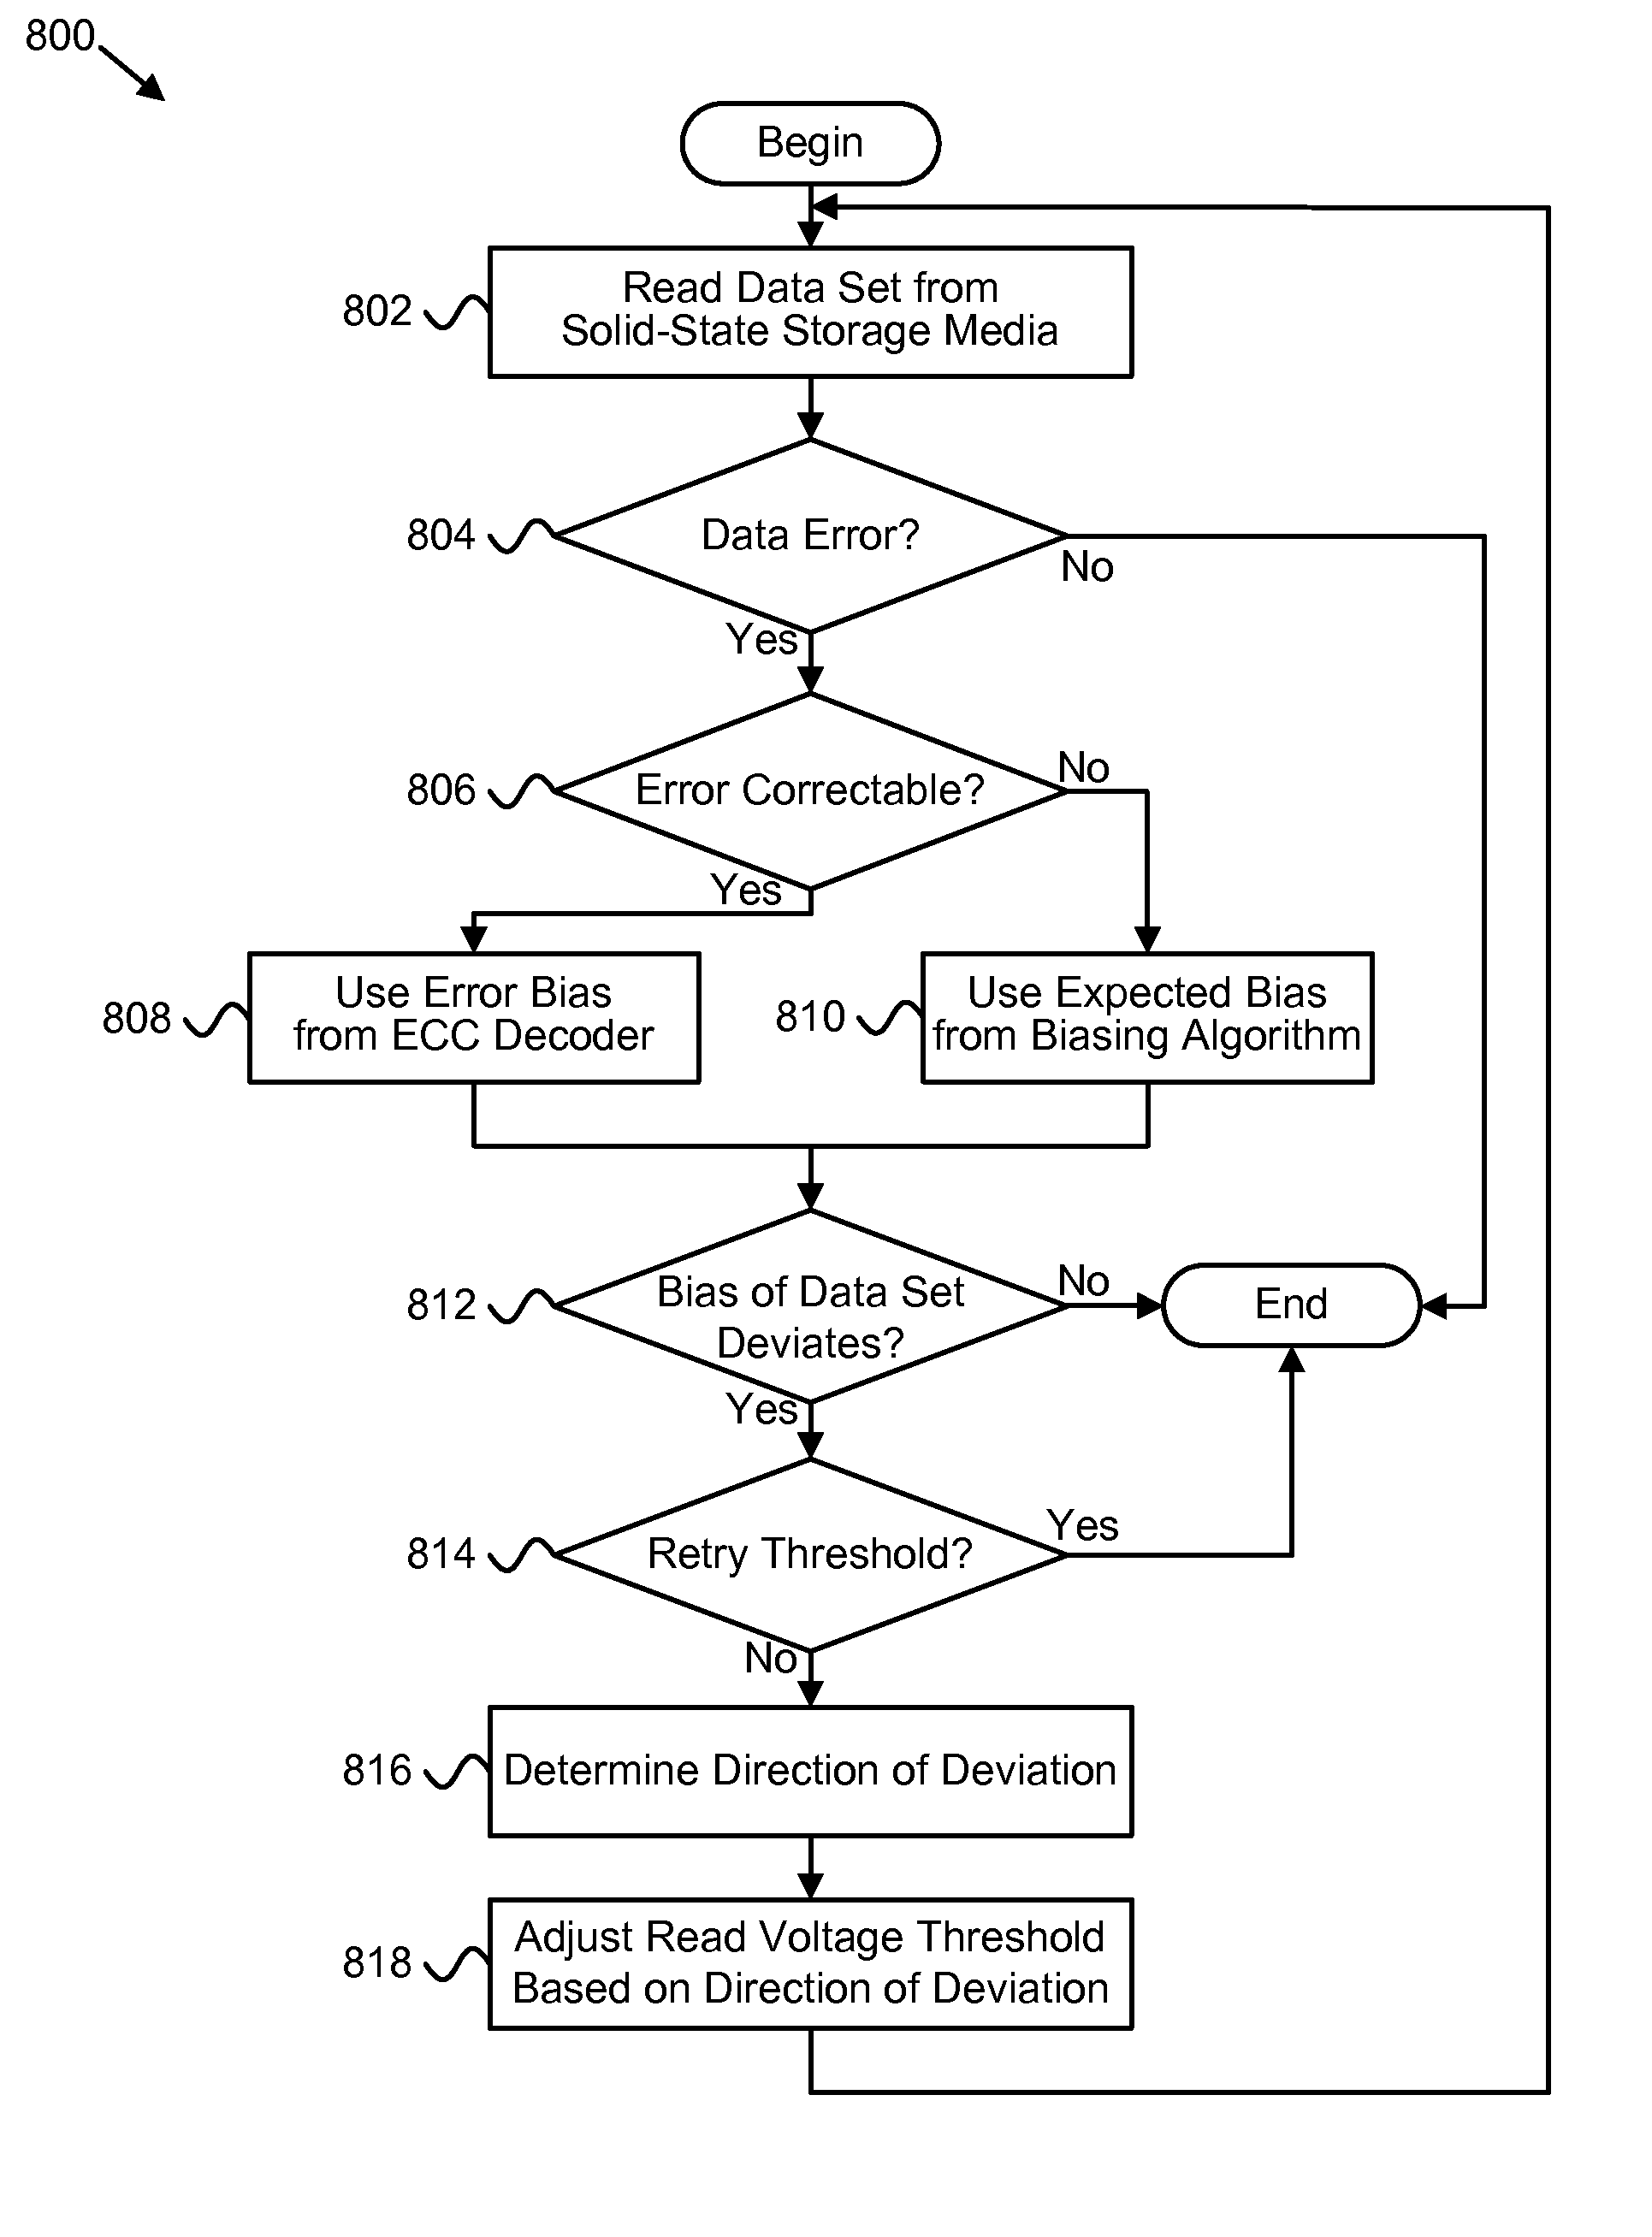 Apparatus, system, and method for determining a read voltage threshold for solid-state storage media